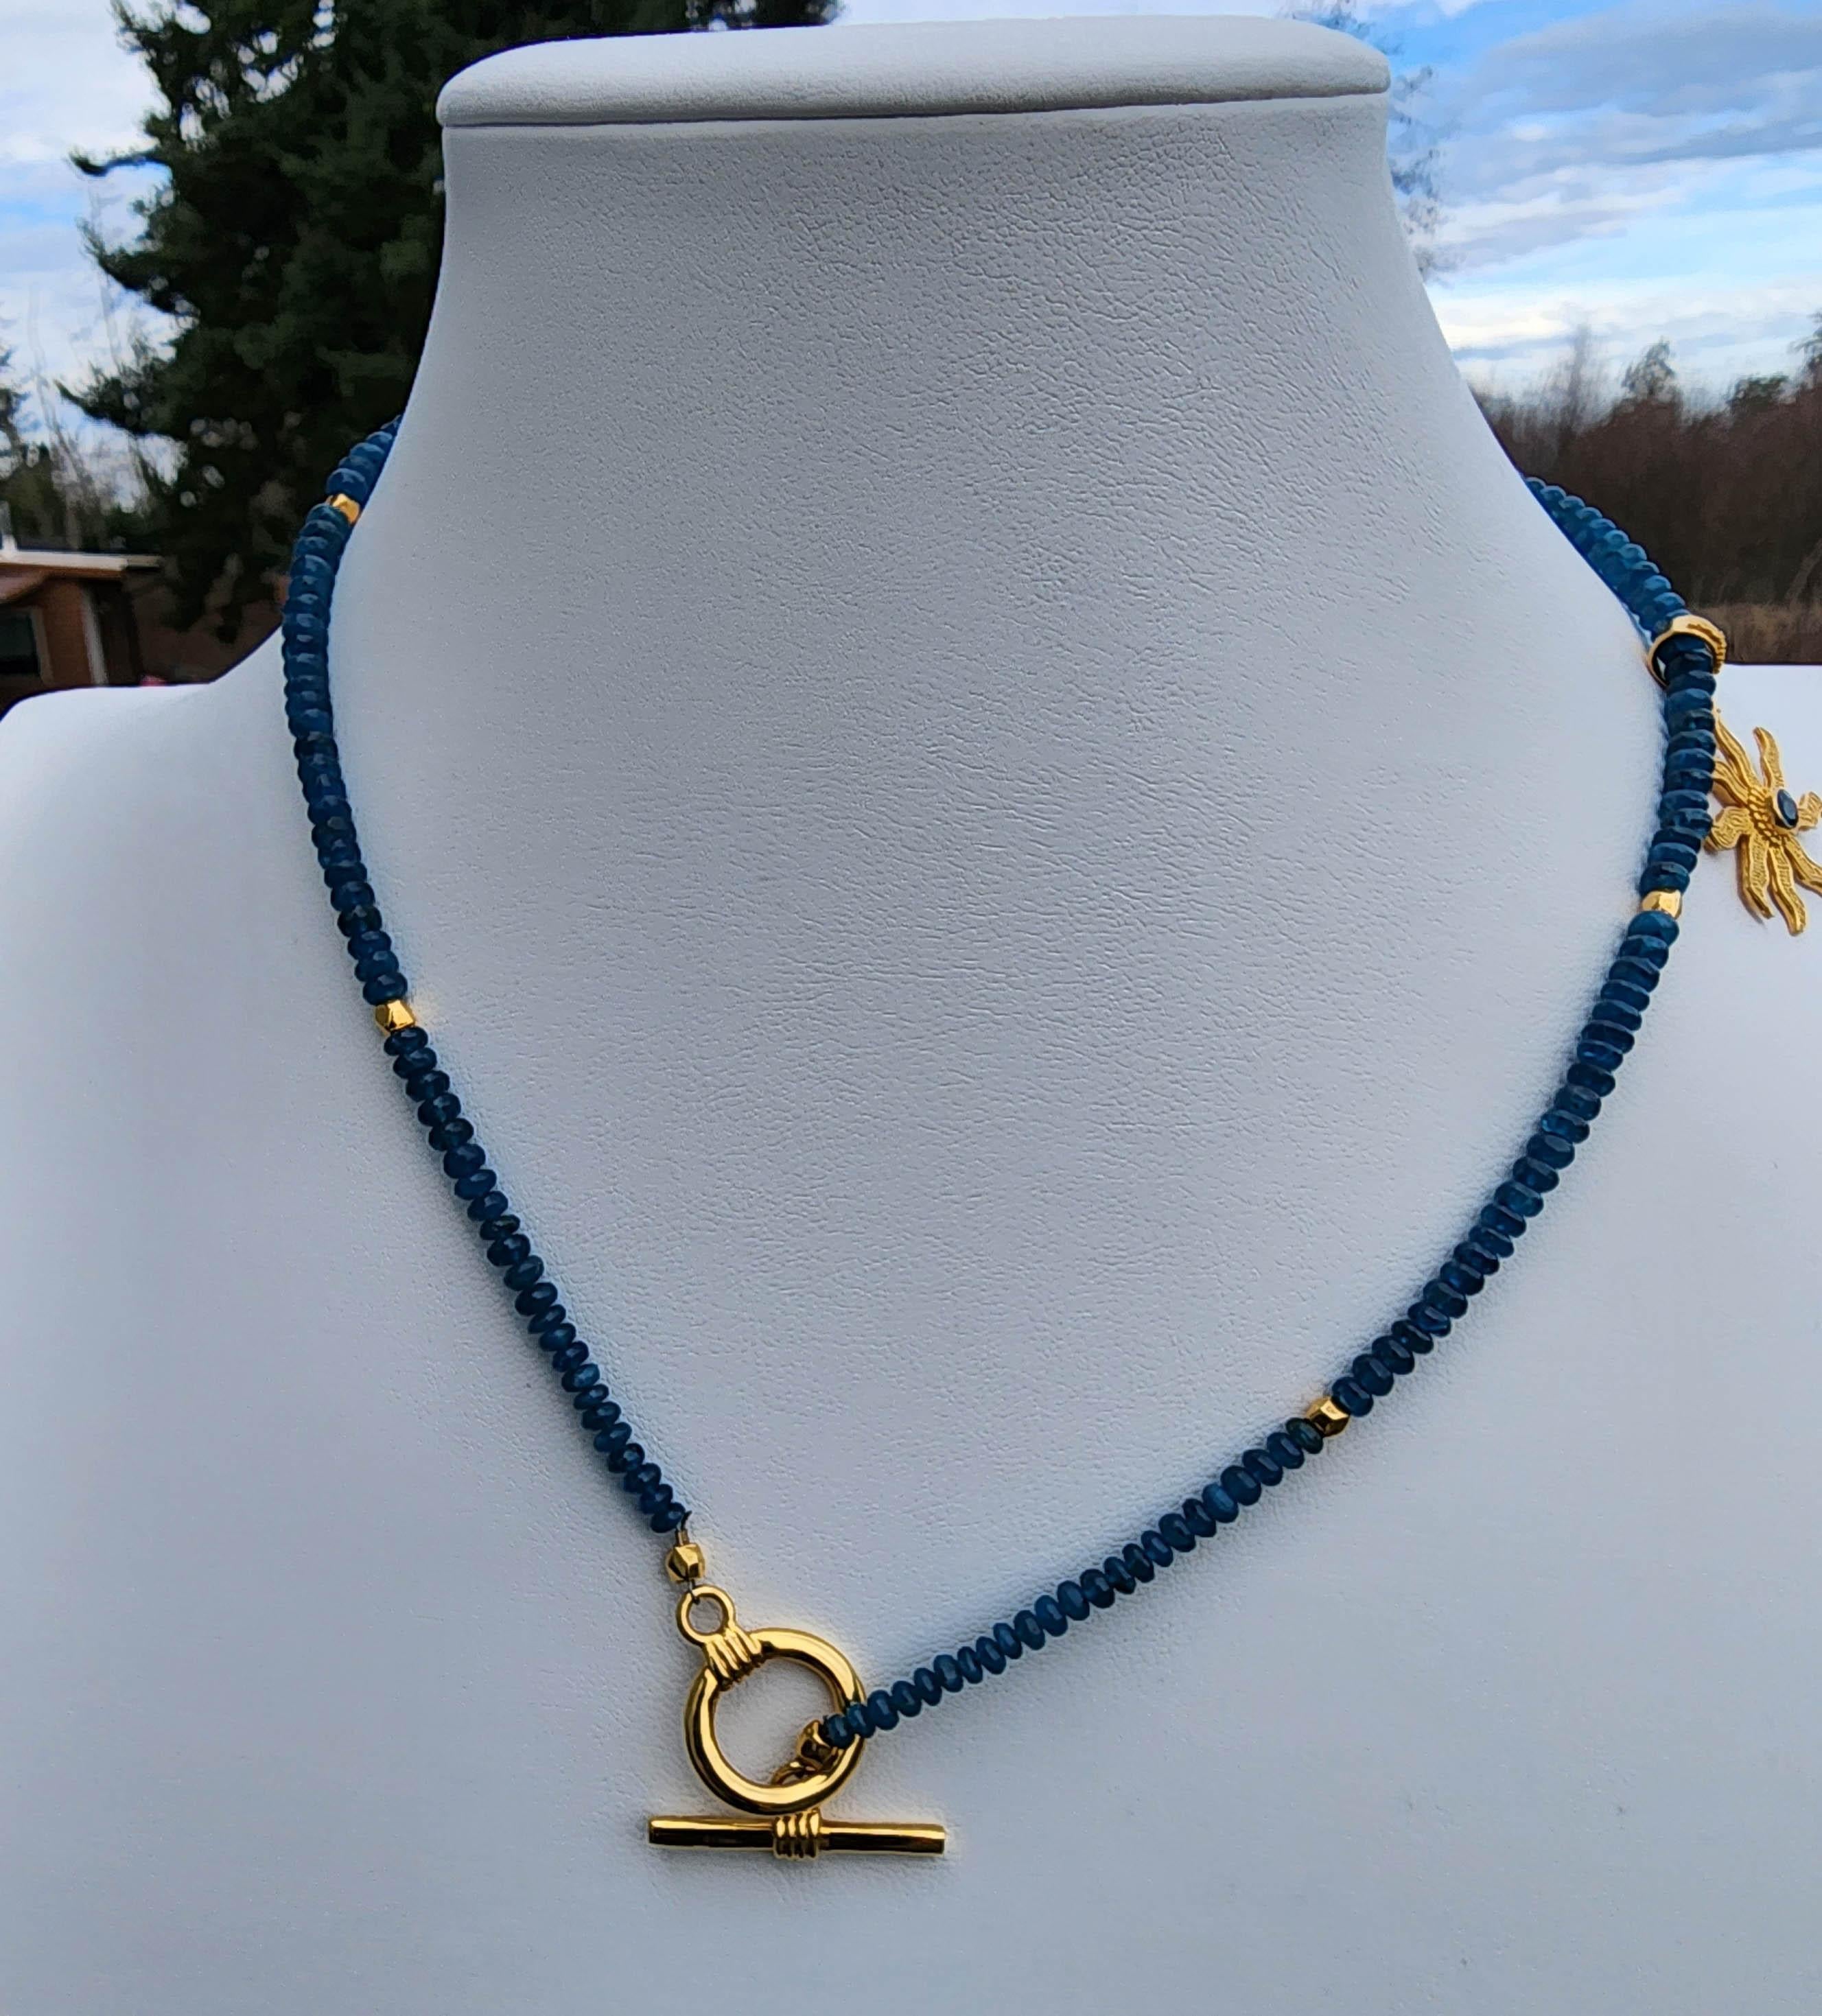 A Beaded Blue Fluorite Necklace of 20 inches with a Gold 